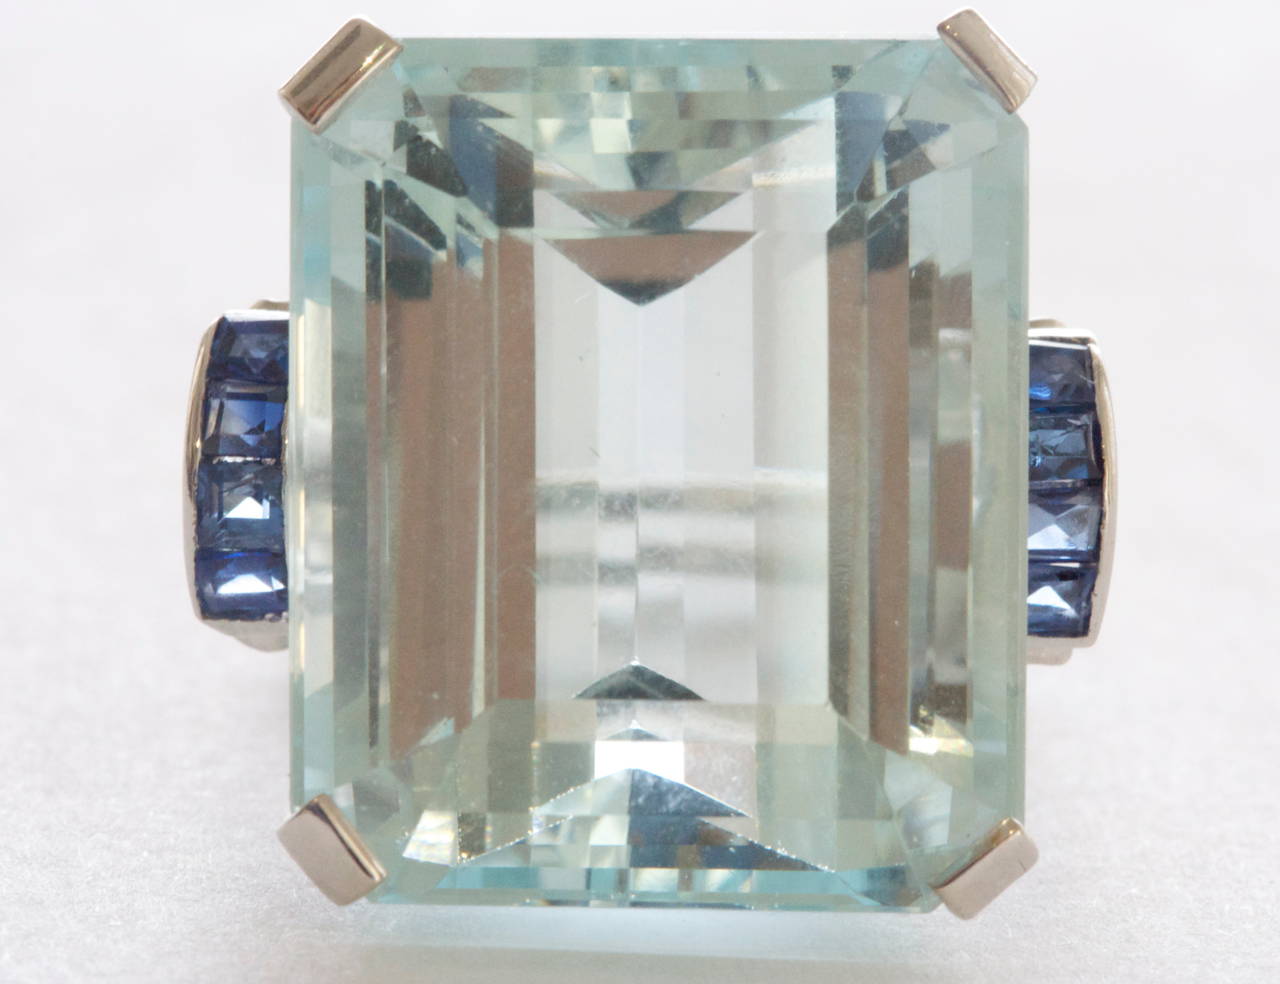 The center stone is a 31 carat lively sky blue aquamarine. Accented by square cut deep blue sapphires. Set in a hand crafted art deco platinum ring.

Ring size 7 and can easily be resized